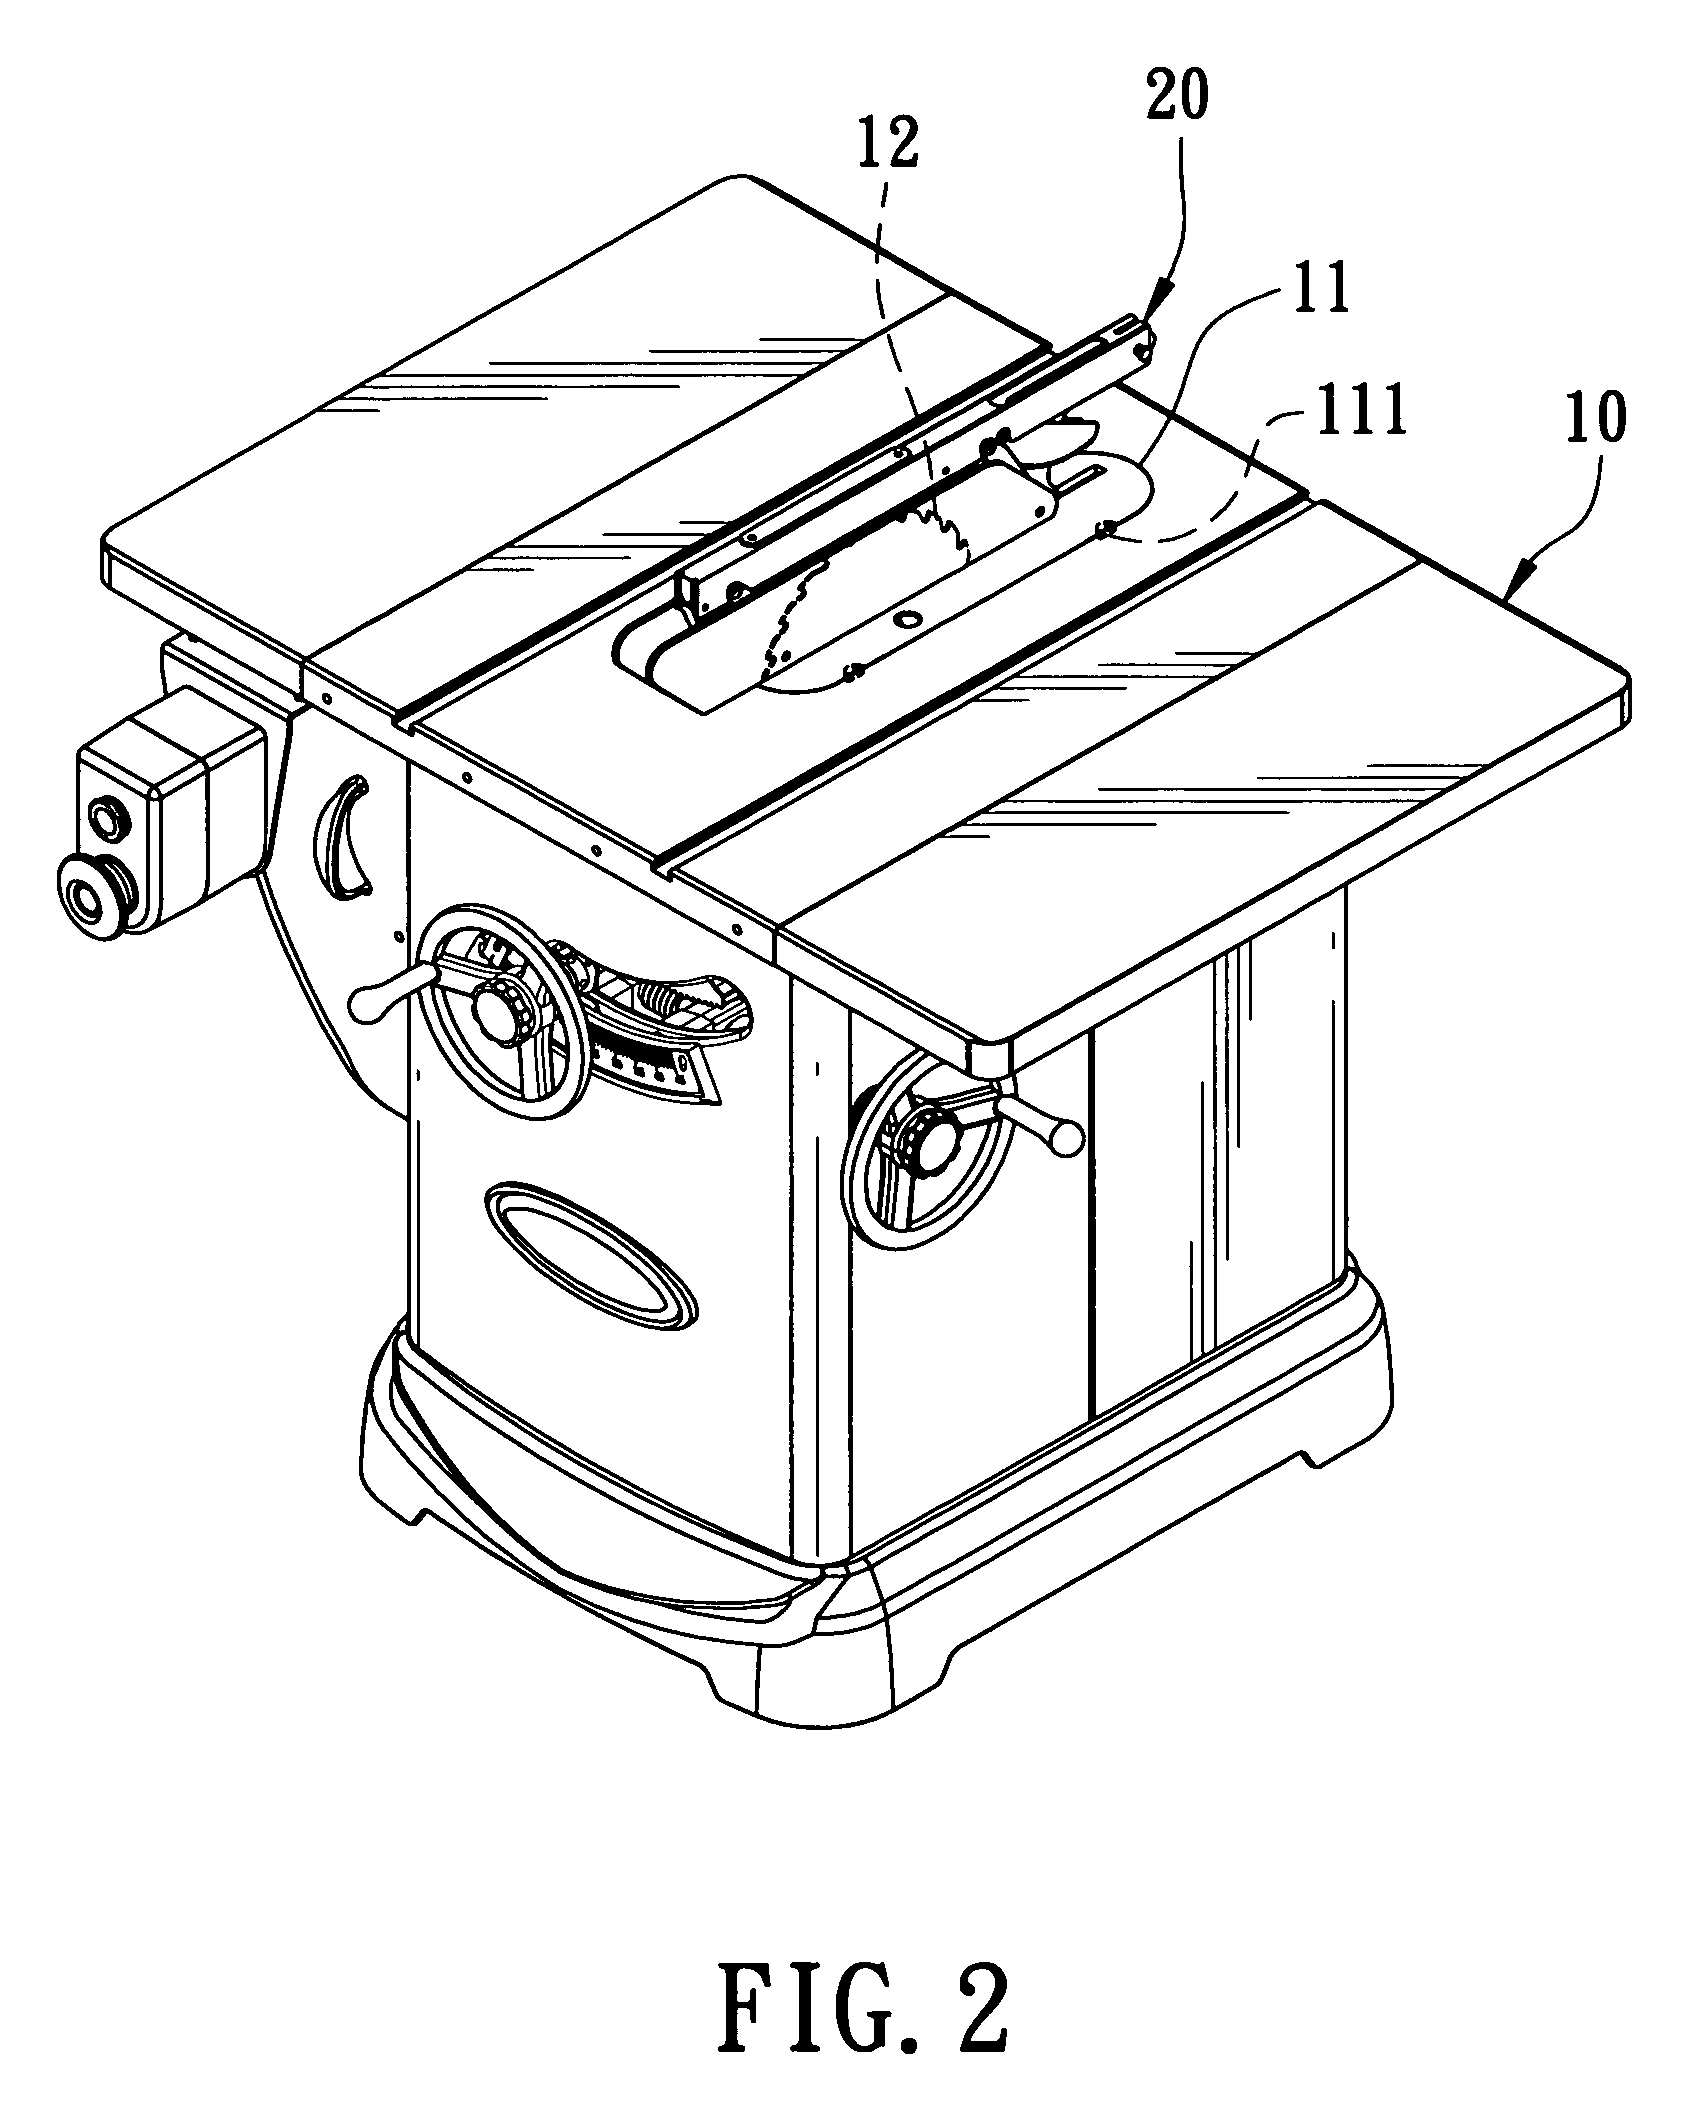 Quickly detachable protective cover unit of a table sawing machine